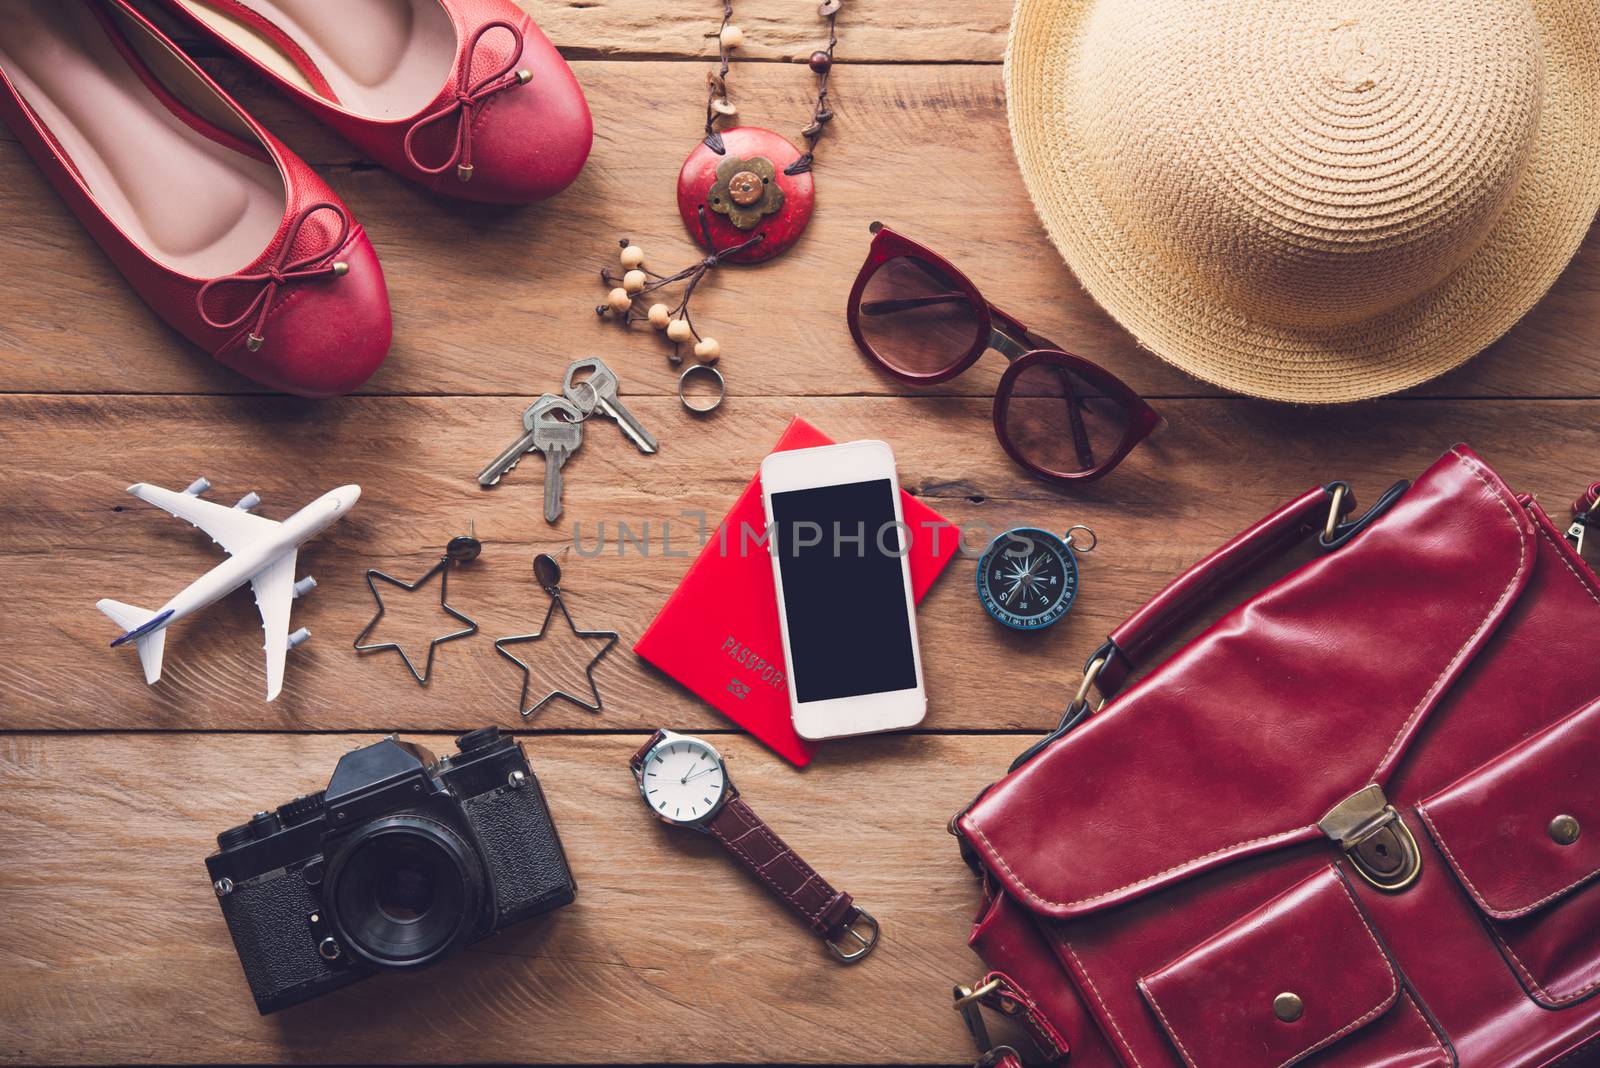 Travel accessories costumes for women. Passports, luggage, The c by photobyphotoboy